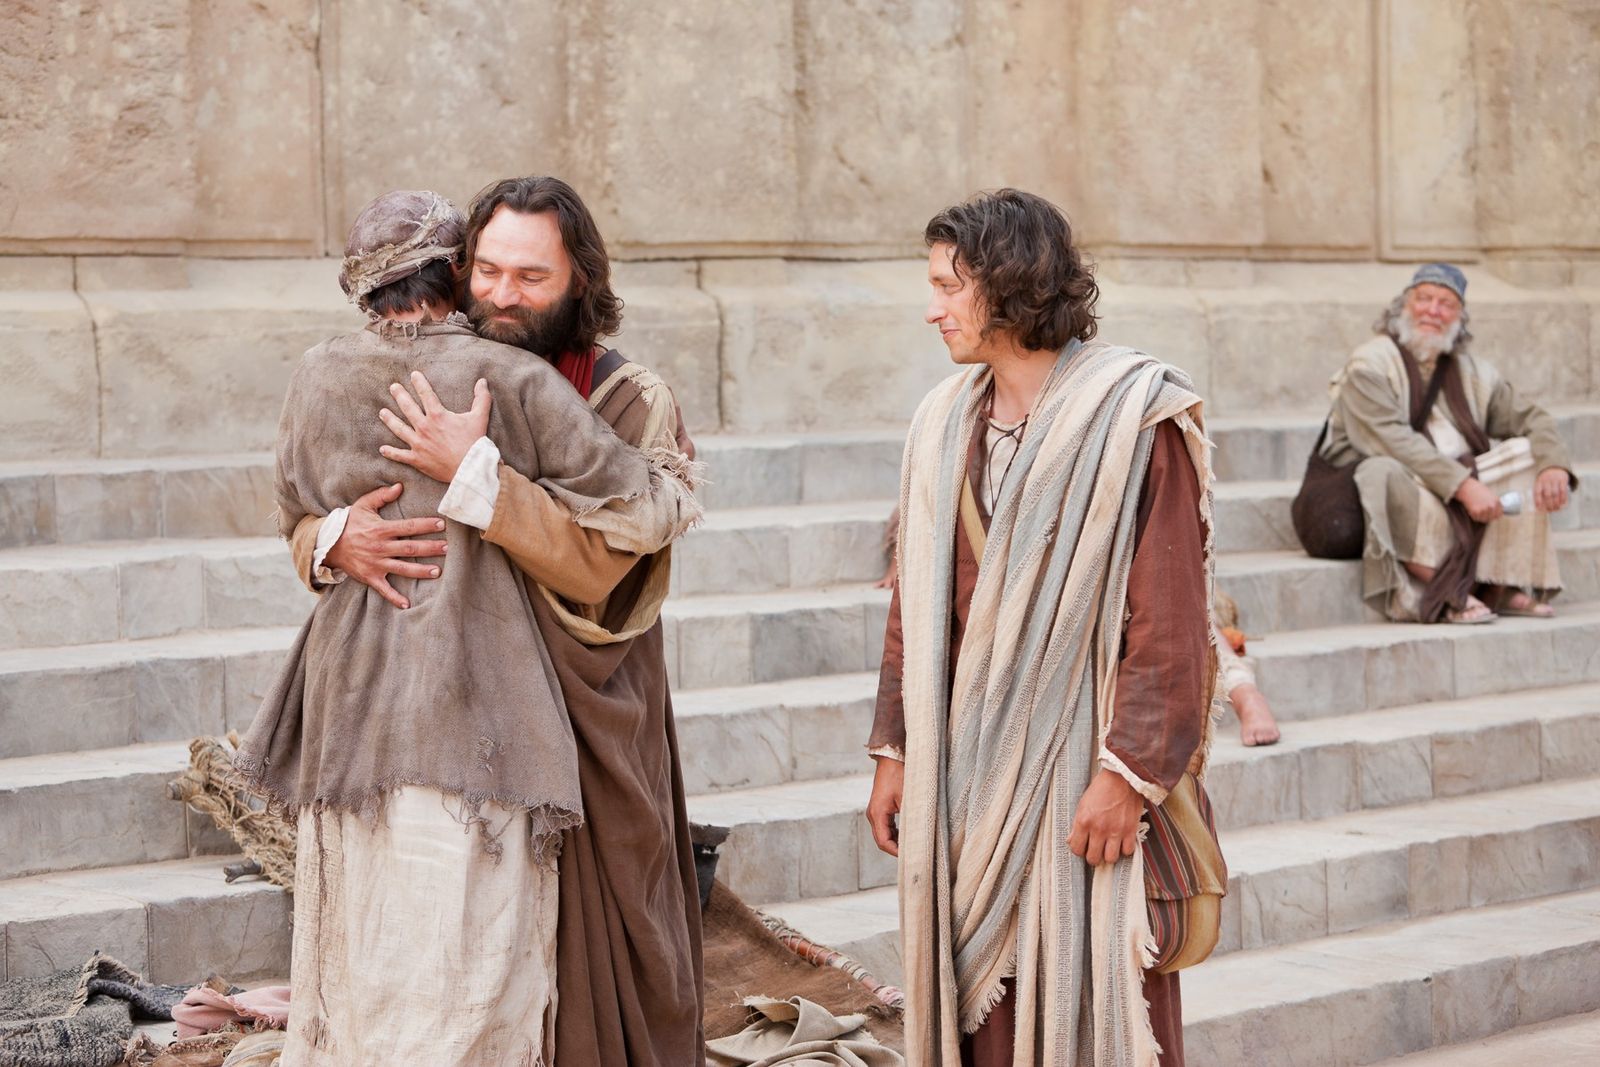 A man crippled since birth is healed by Peter and John, and he thanks them with an embrace.